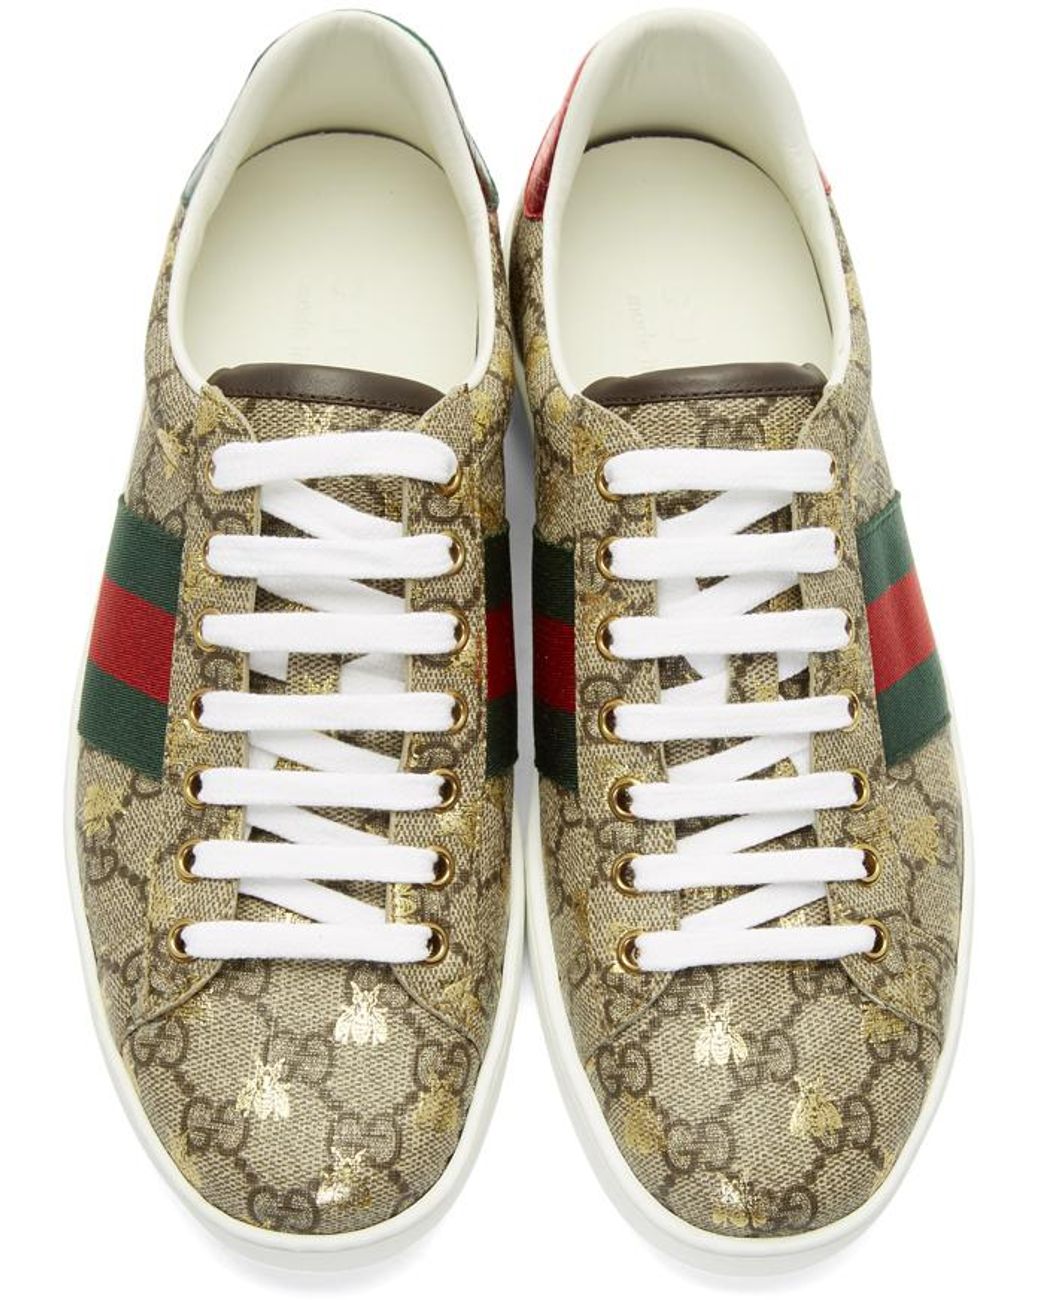 Gucci Leather Ace gg Supreme Bees Sneaker in Beige (Natural) for Men - Save 33% Lyst